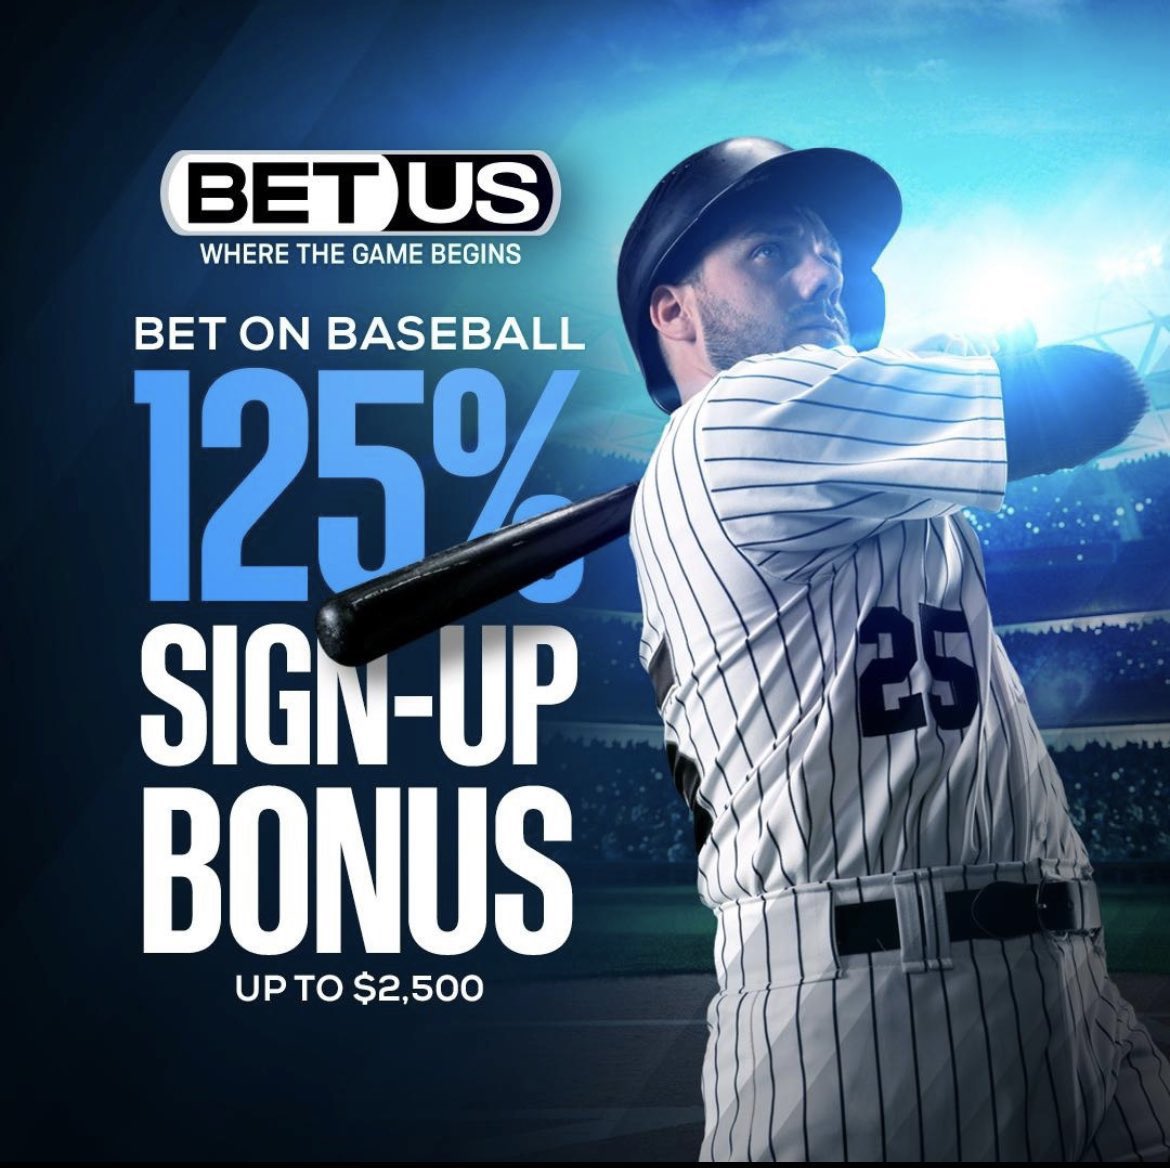 ⚾️ MLB FREE PLAY ⚾️

Detroit Tigers TT OVER 2.5 (-145)

Make your first deposit with 
@BetUS_Official and get 125% match!!
Code: bit.ly/BigTone125Sign…

#MLB #sportsbettingpicks #GamblingTwitter #FreeBet #BettingPeople #Runs #Tigers